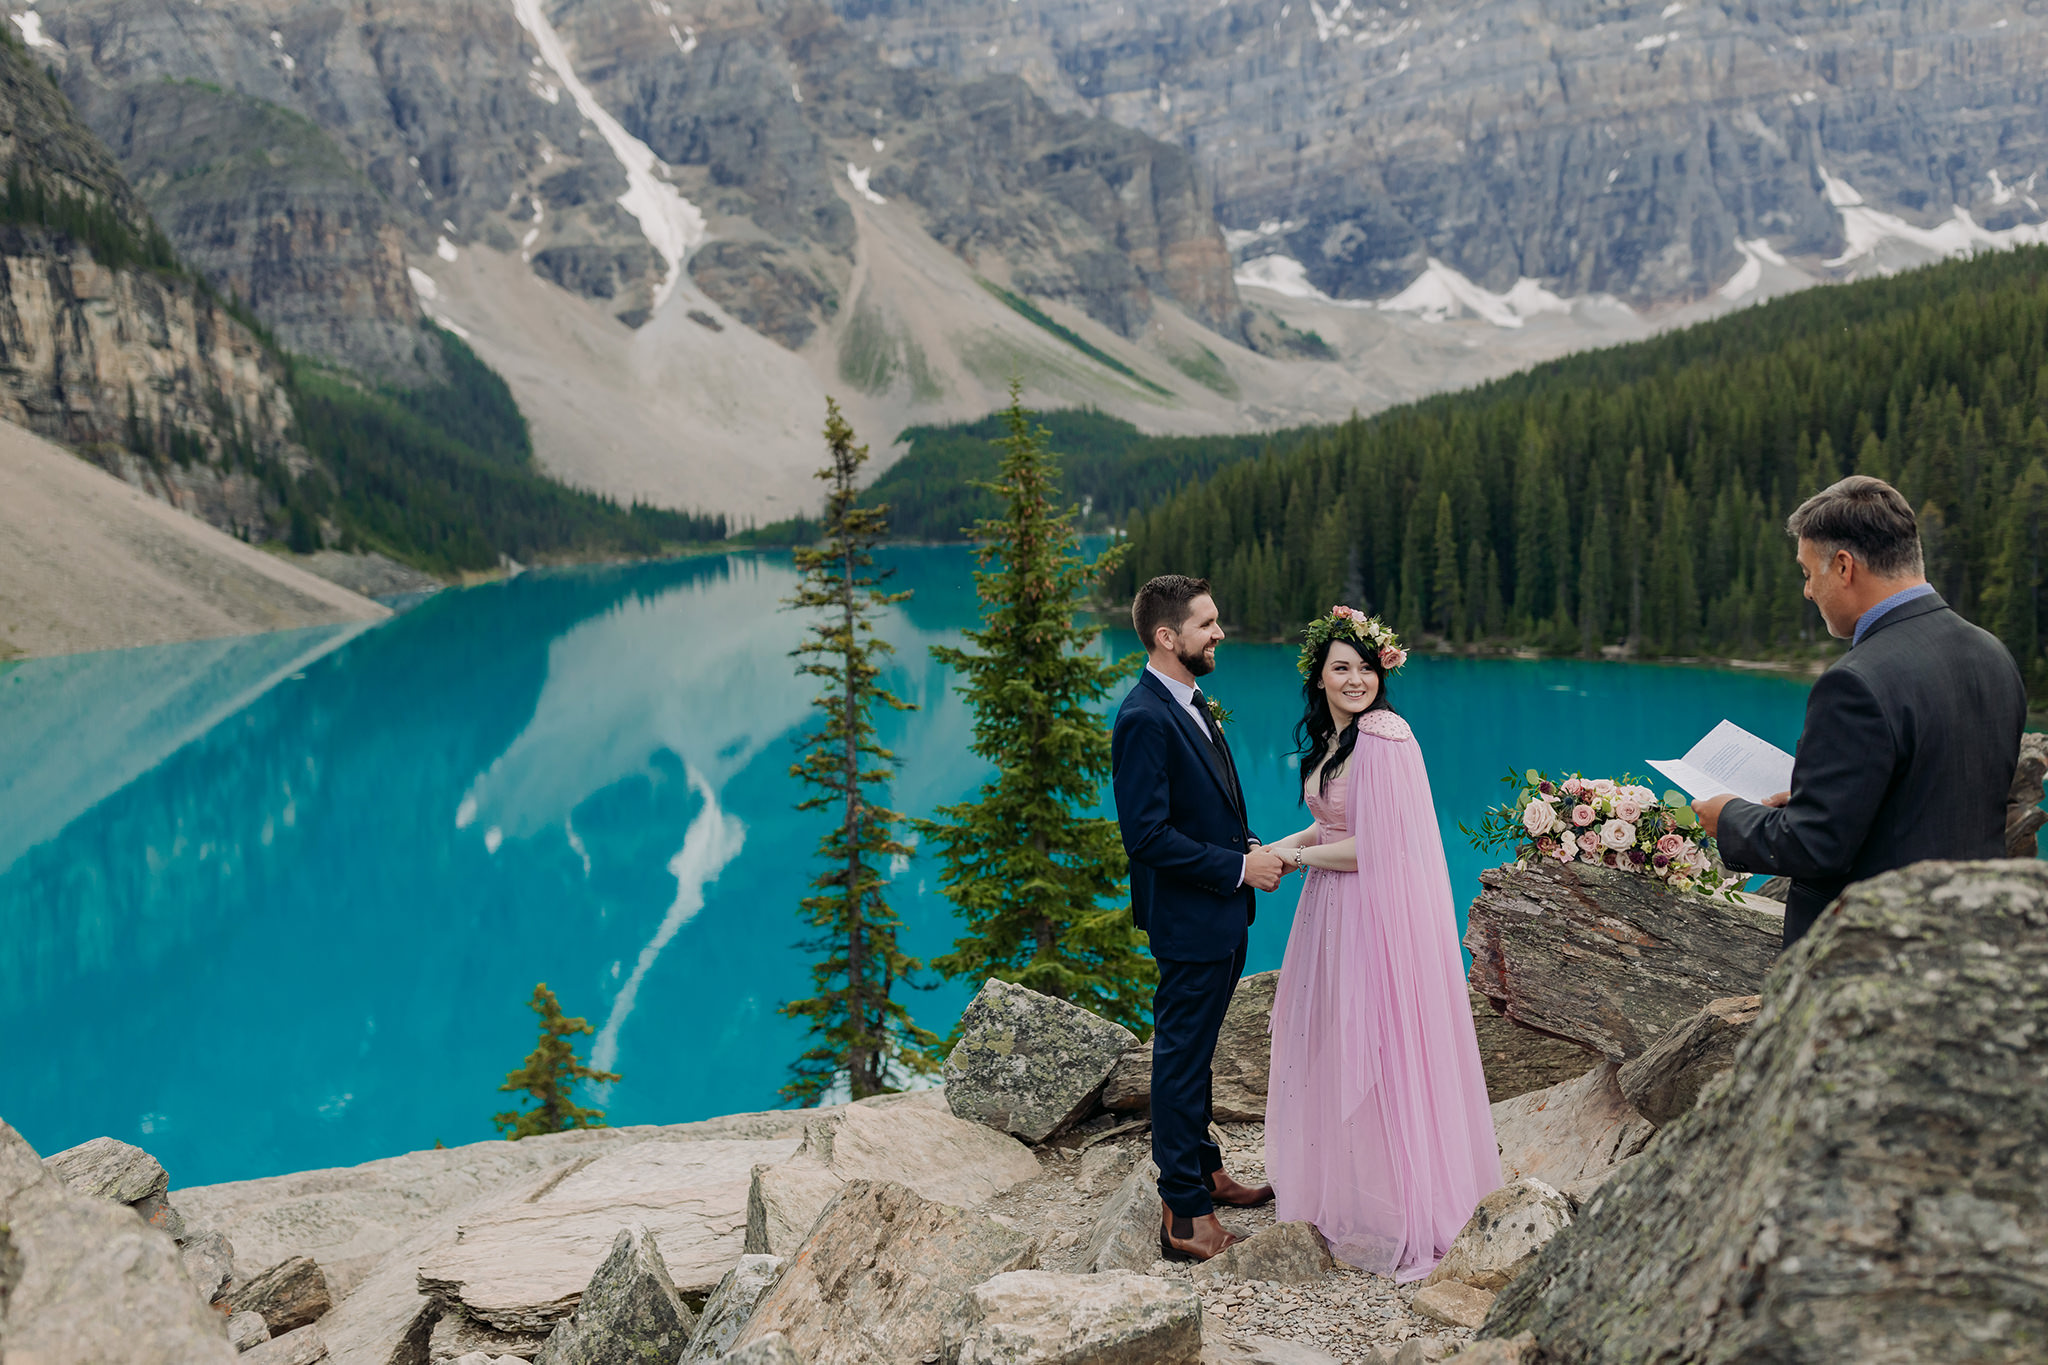 how to elope at moraine lake wedding ceremony for elopement atop the rockpile surrounded by mountains and reflecting turquoise waters